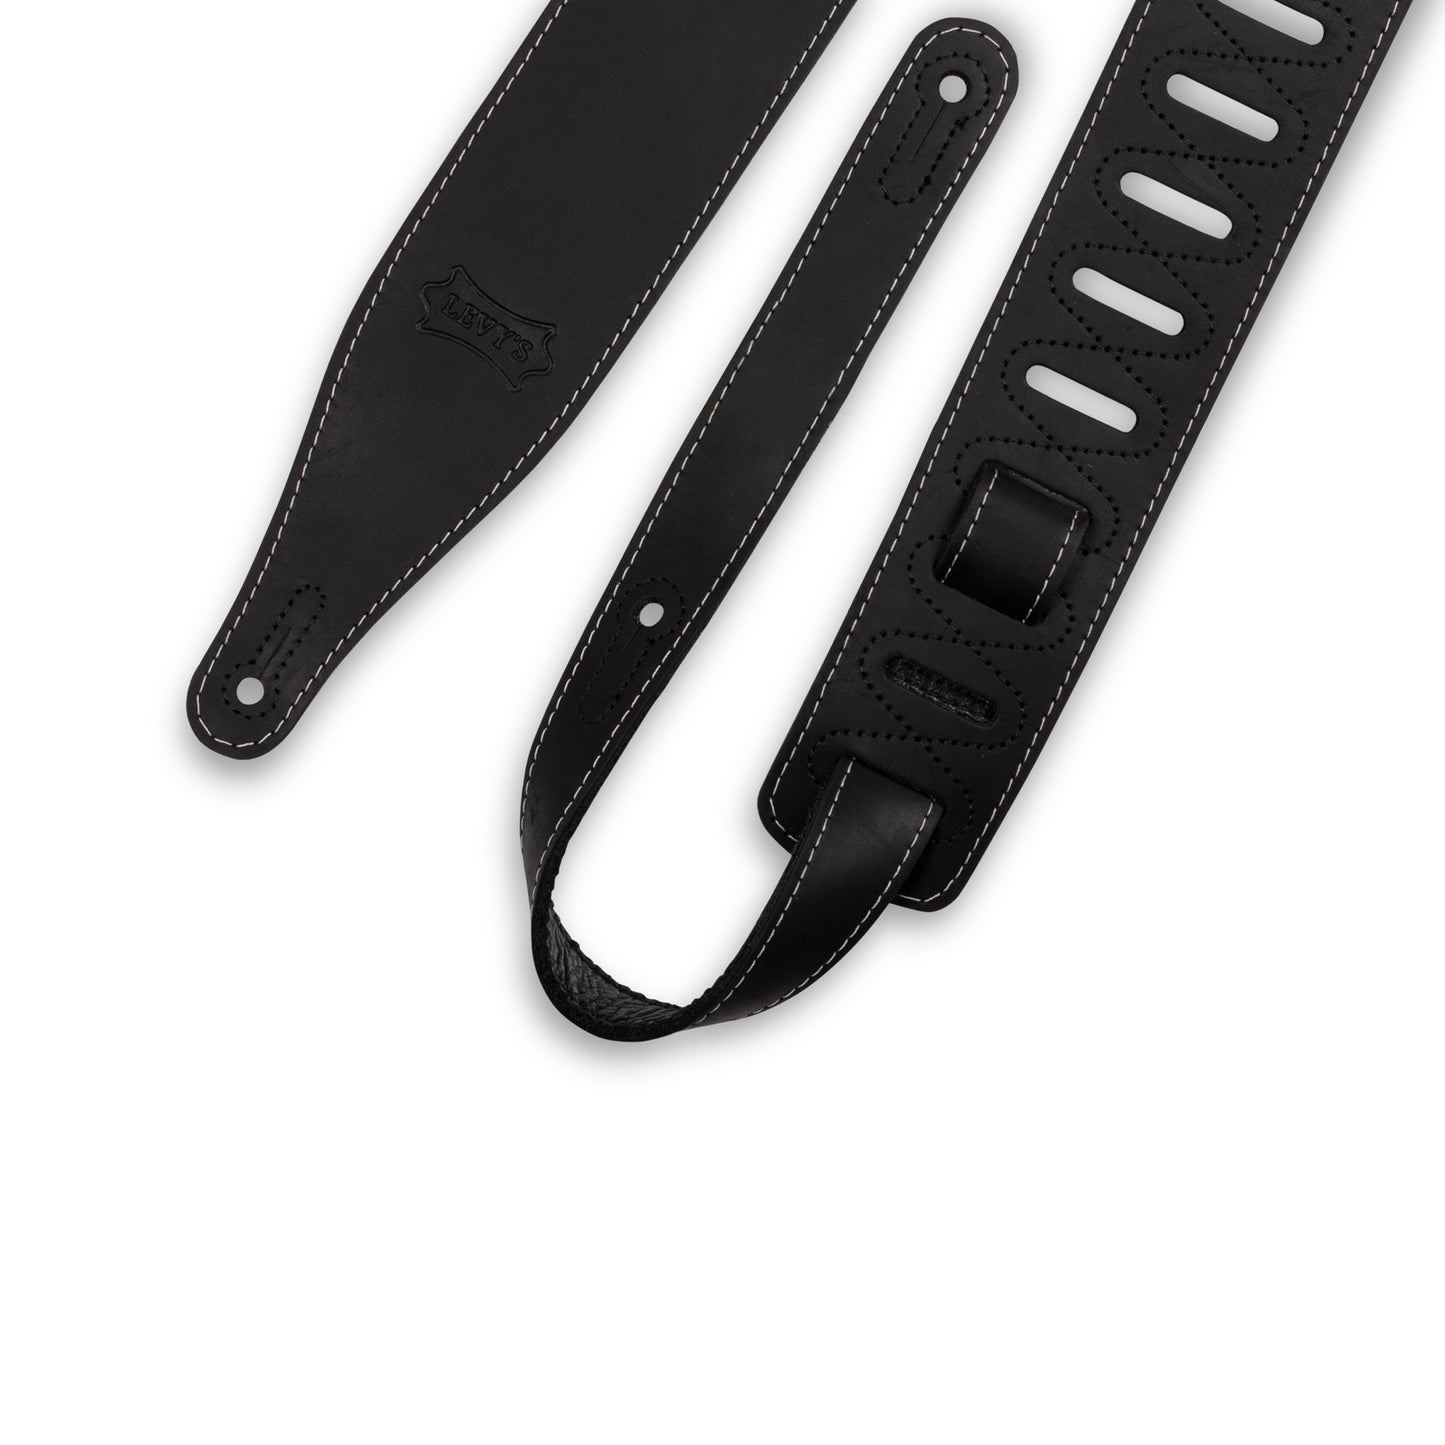 2.5" Pull-Up Butter Leather Guitar Strap - BLK